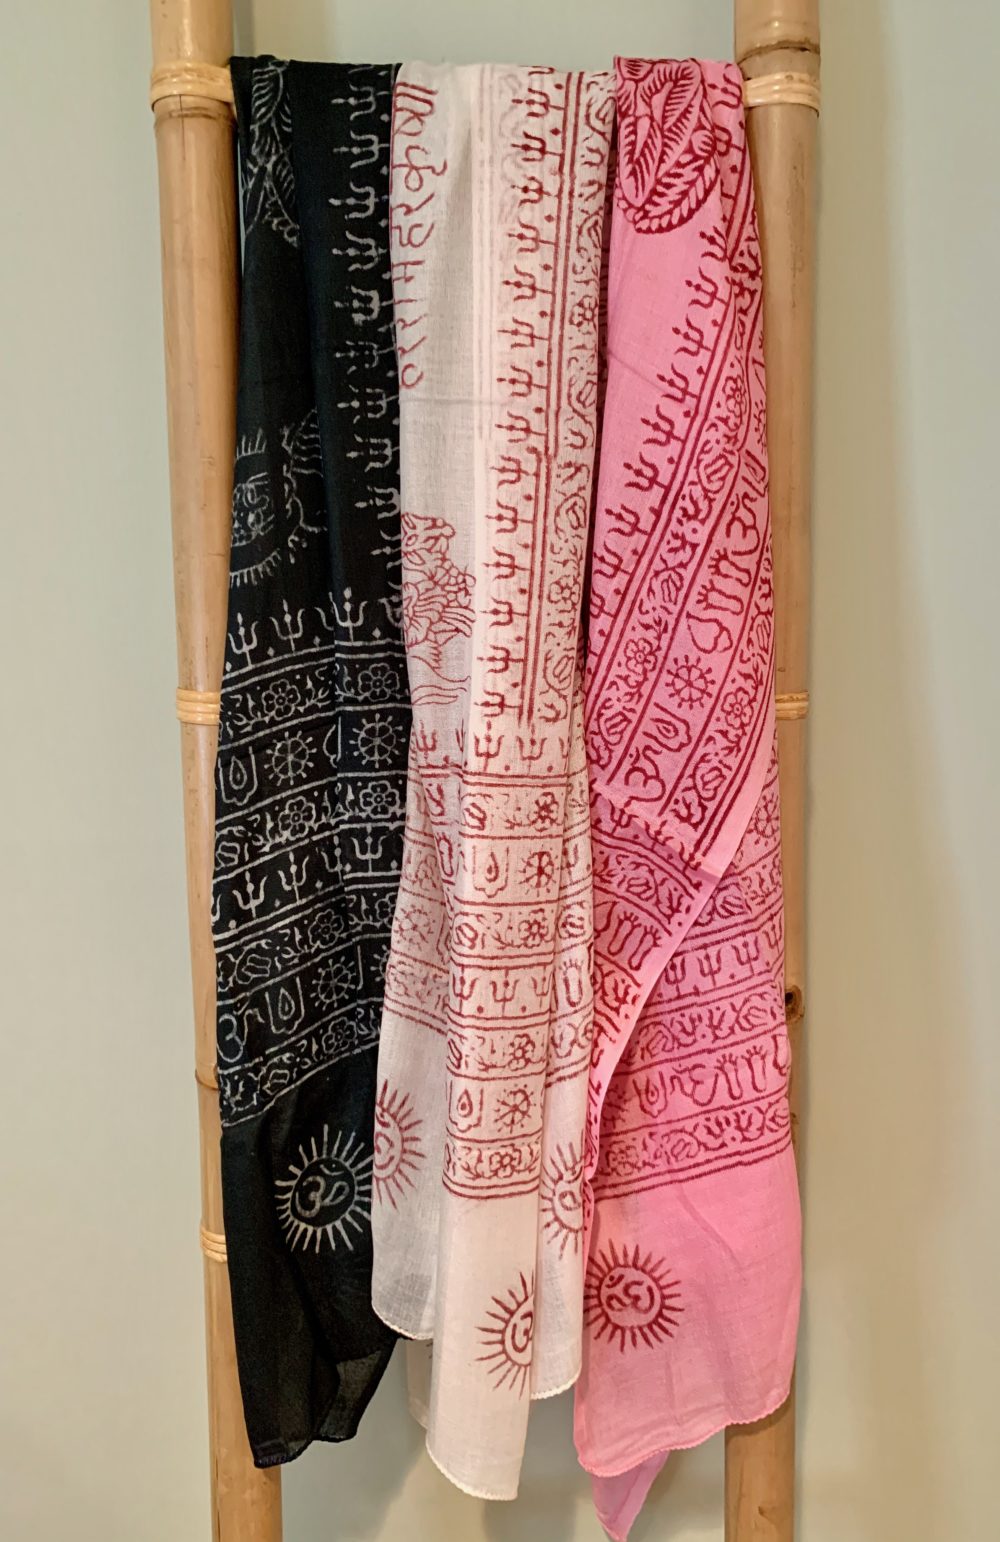 Set of 3 printed prayer scarves for Happiness